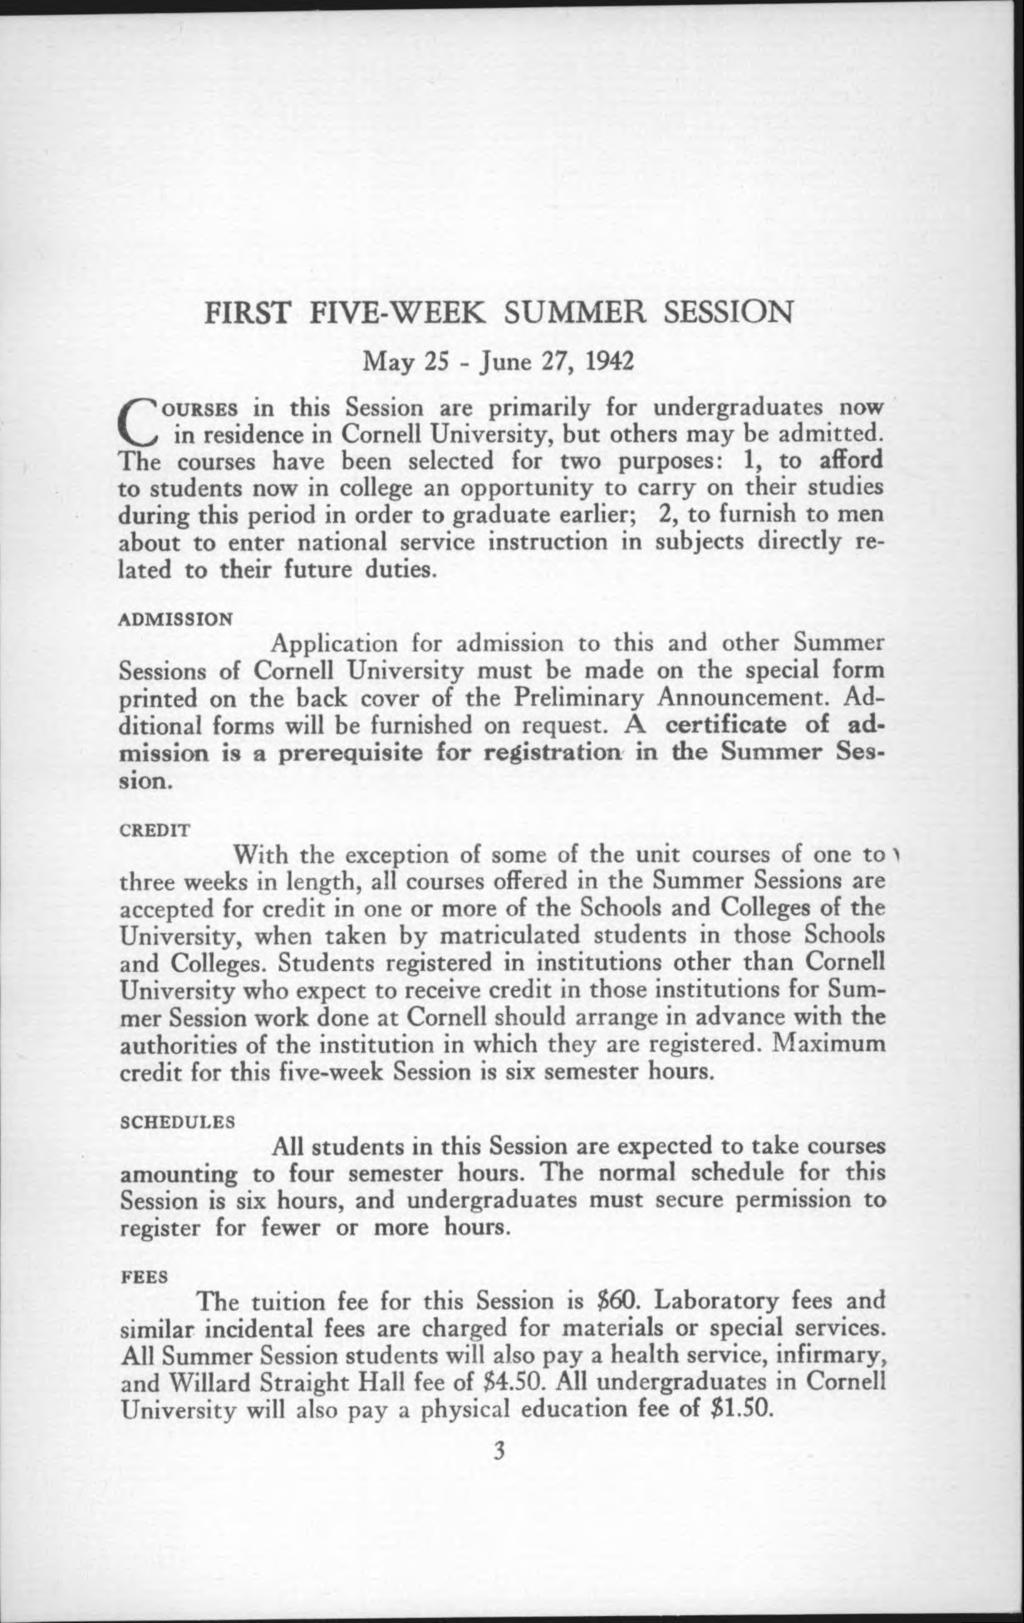 FIRST FIVE-WEEK SUMMER SESSION M ay 25 - June 27, 1942 Co u r s e s in this Session are prim arily for undergraduates now in residence in Cornell University, but others m ay be adm itted.